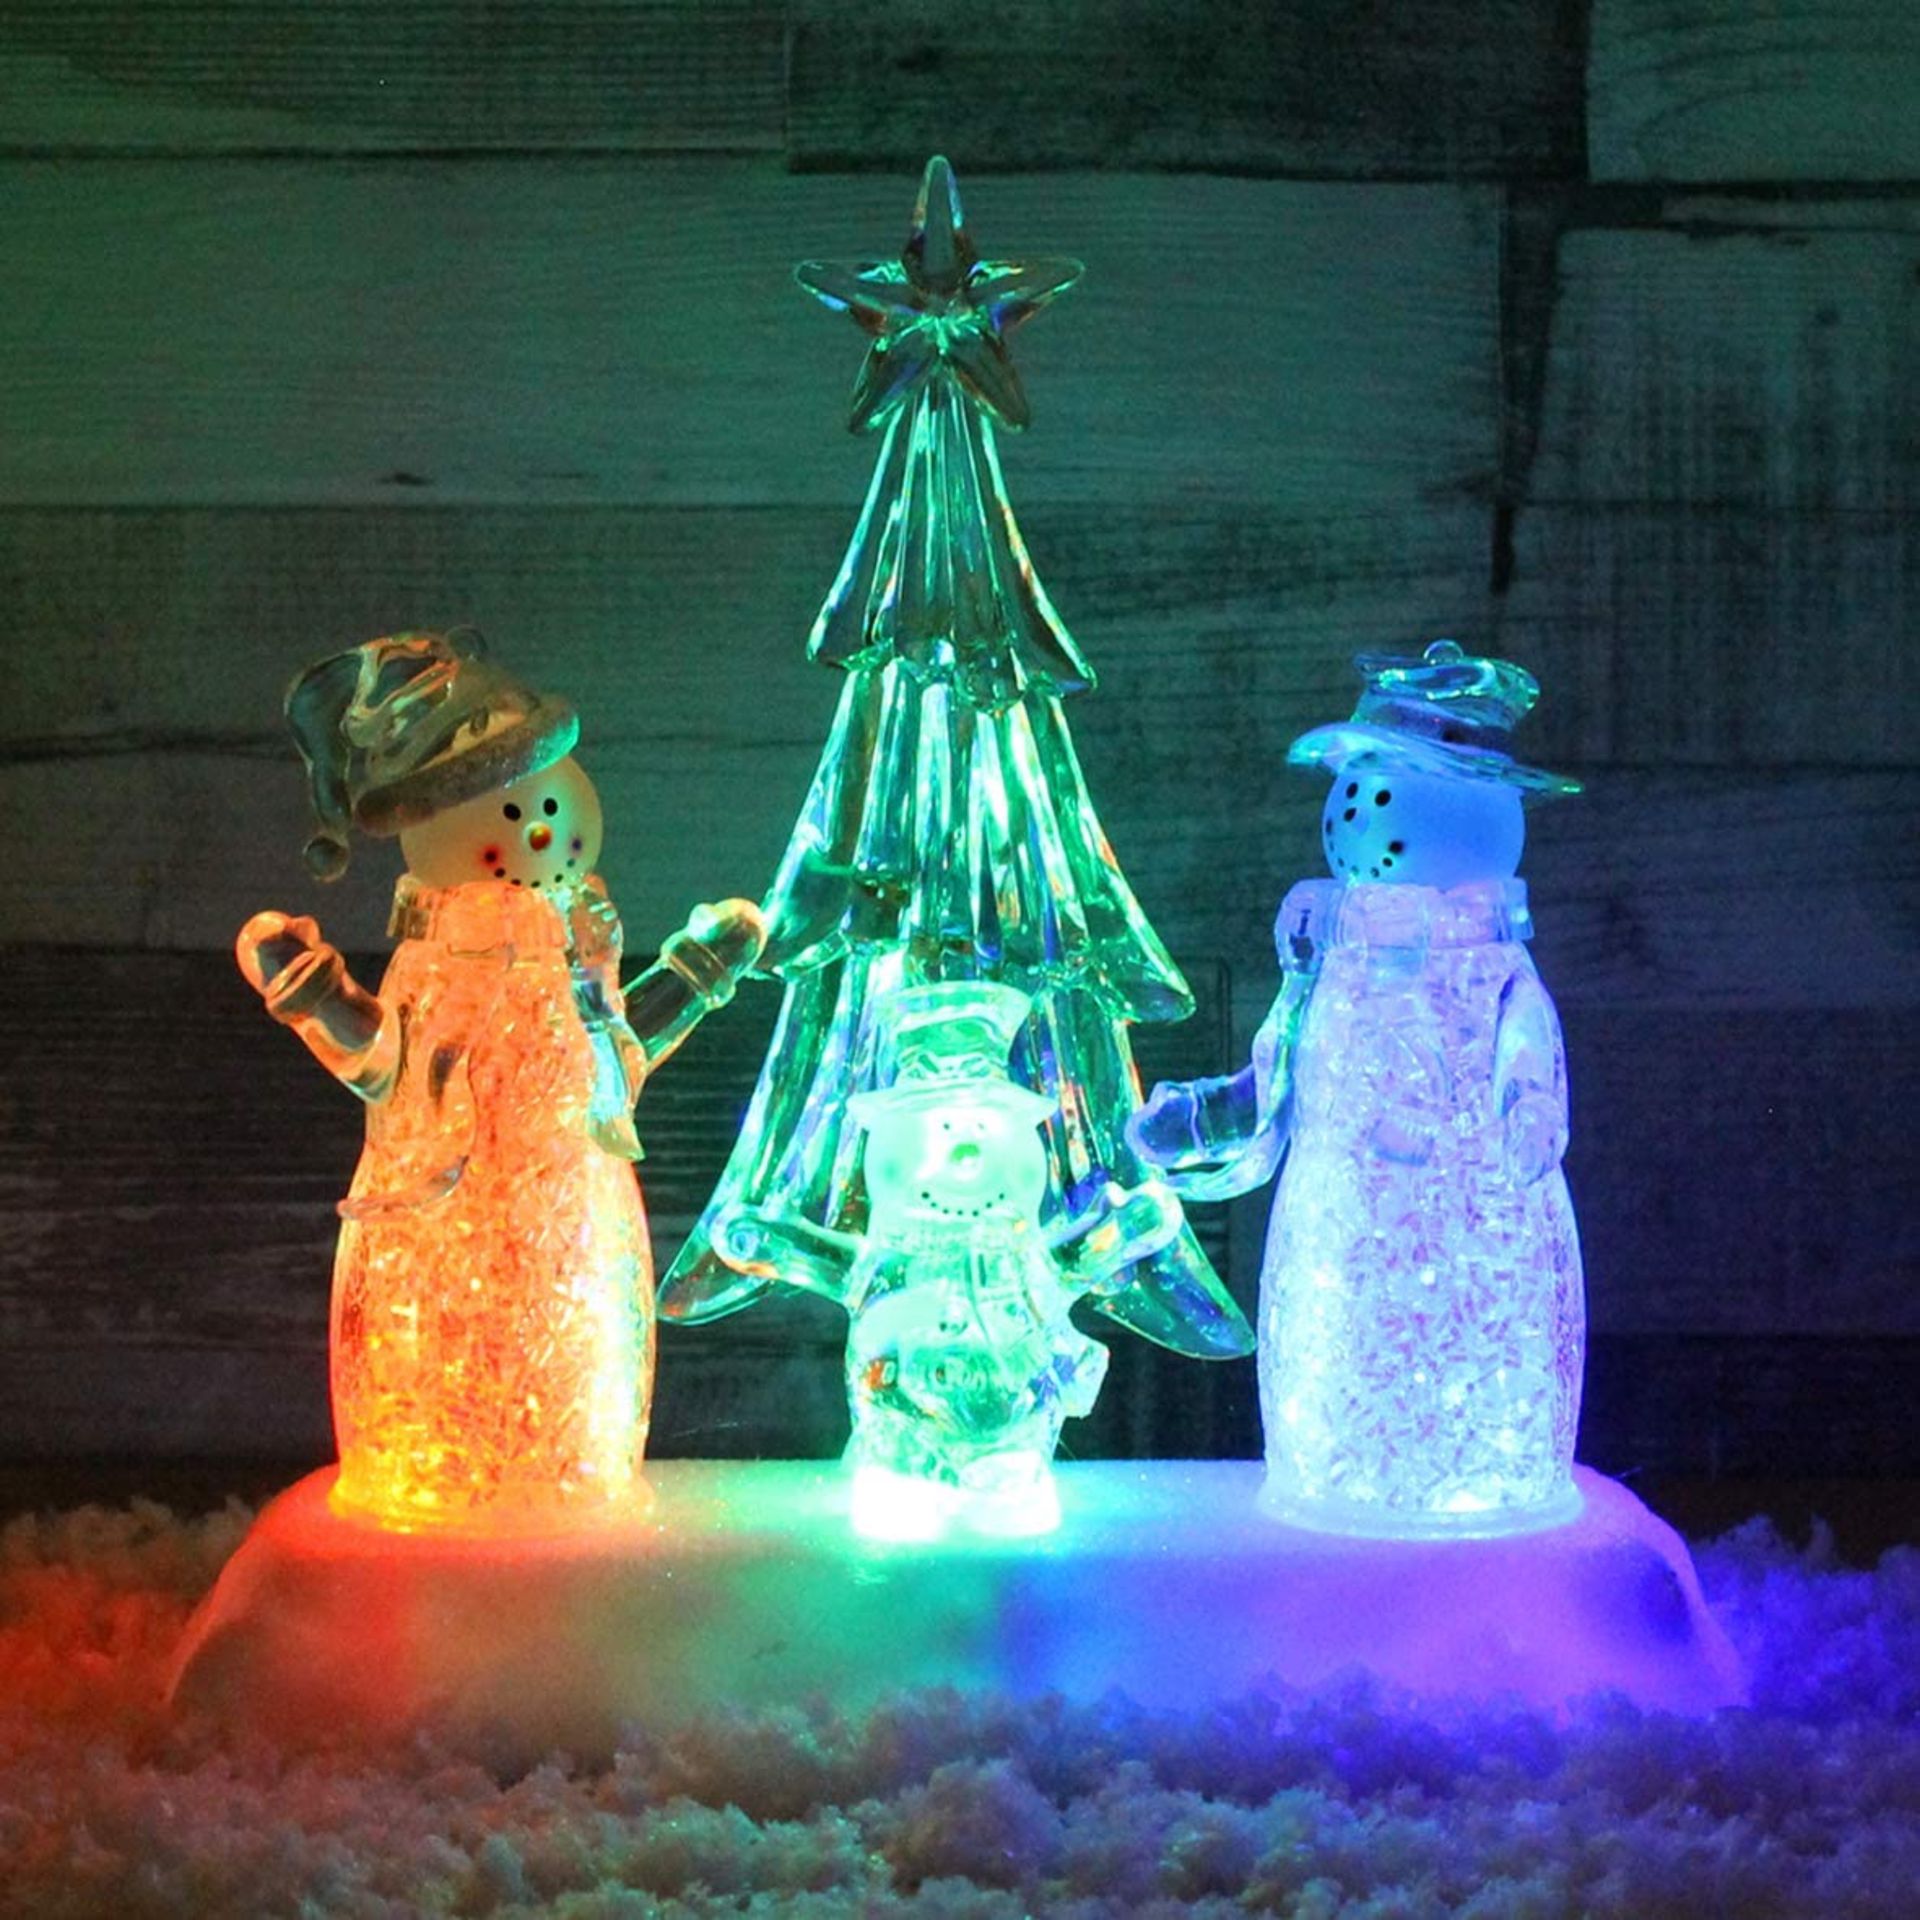 Christmas Workshop Acrylic Snowman Family Scene, Colour Changing LED Lights - Image 3 of 3